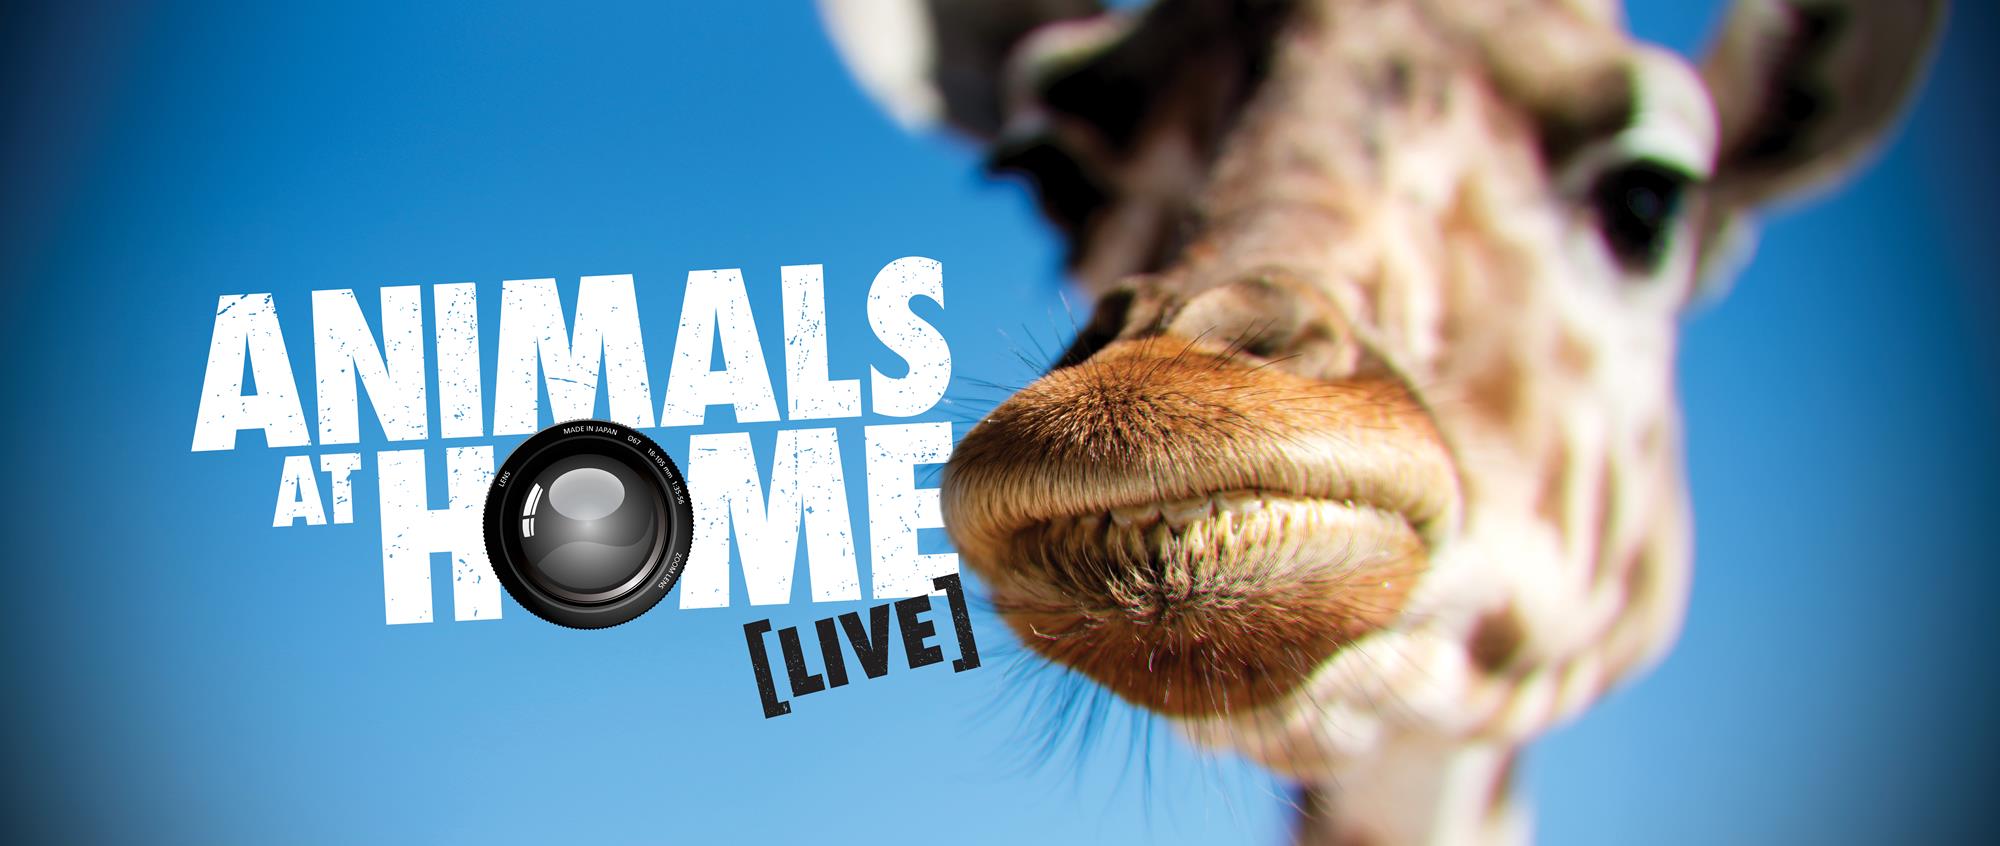 Animals at Home, Live: The logo is right next to a Giraffe, with focus on their mouth, both against a sky blue background.